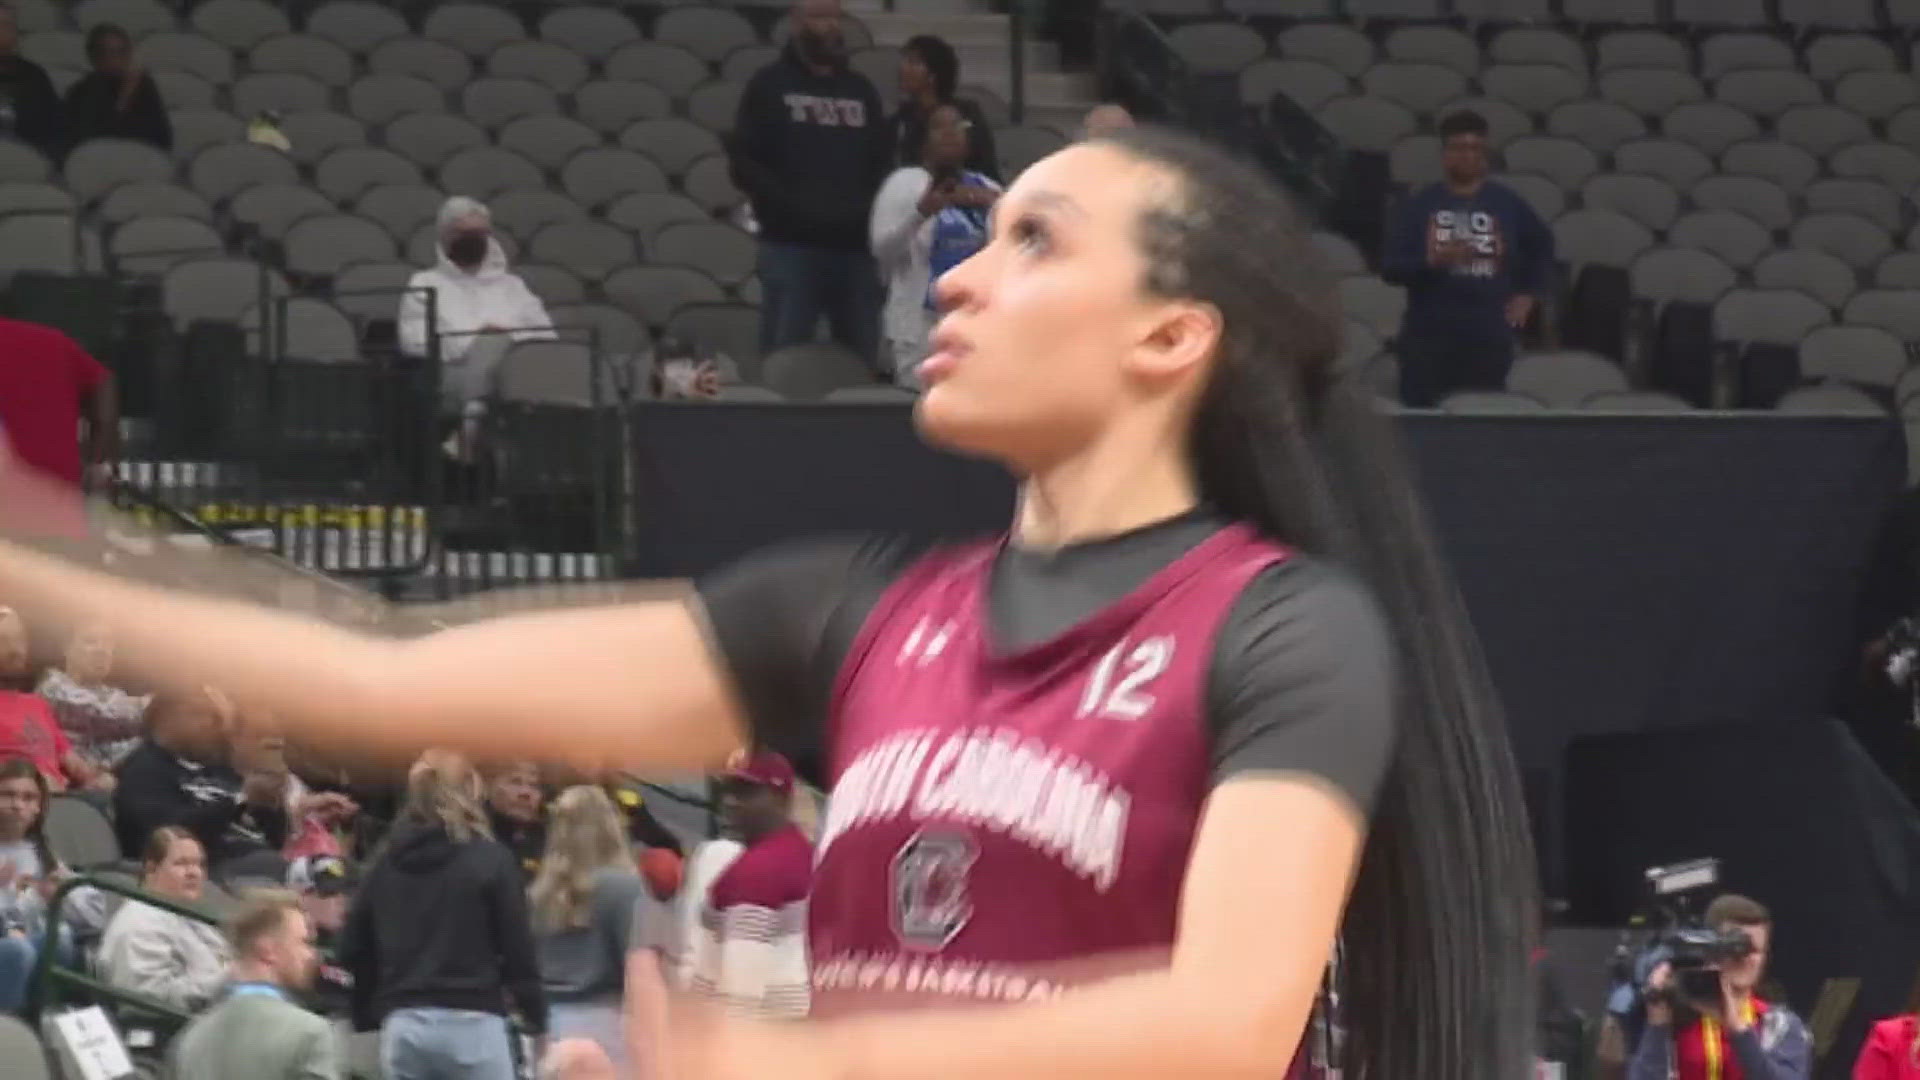 The 3-time former Ms. Basketball in the state of the Illinois was hoping to make the roster after being drafted by the Minnesota Lynx last year.